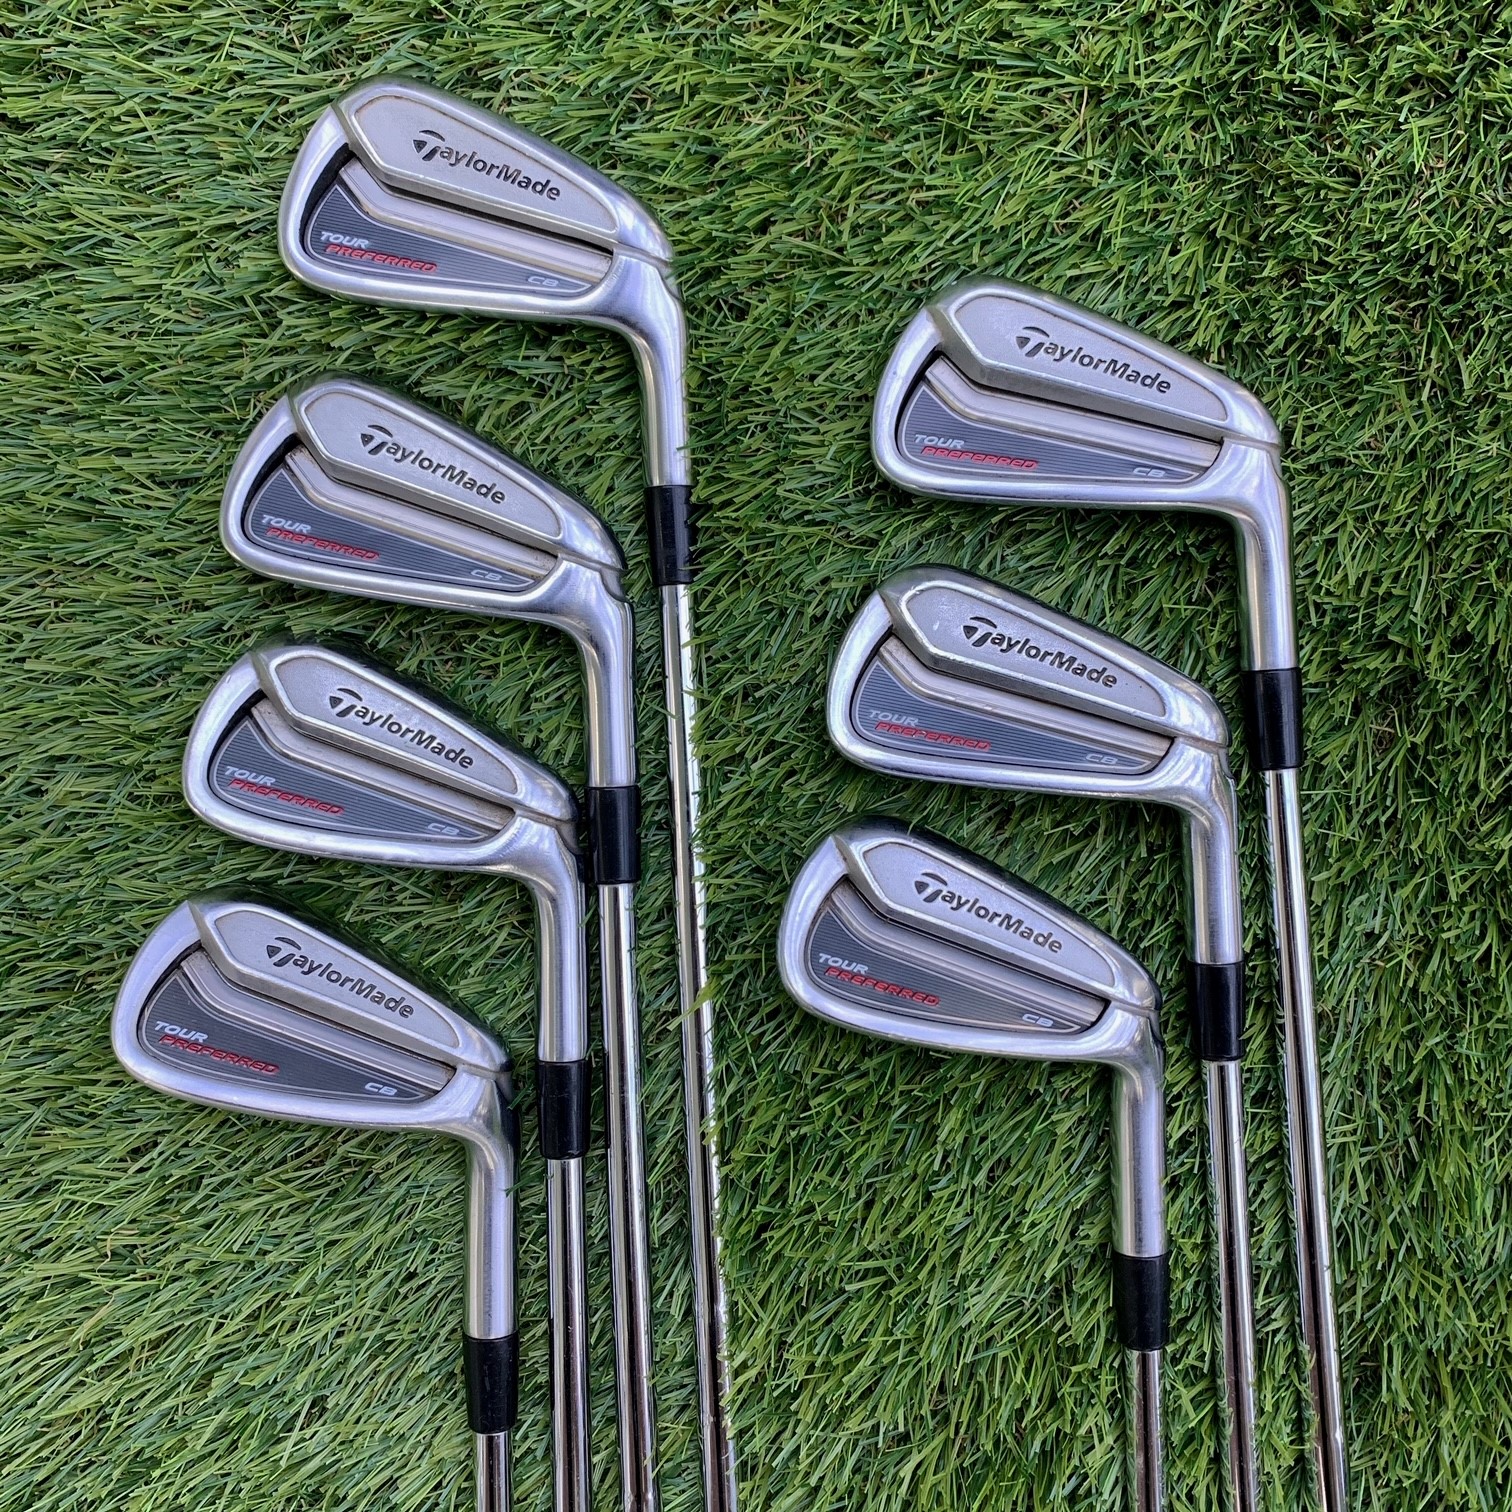 used taylormade tour preferred irons